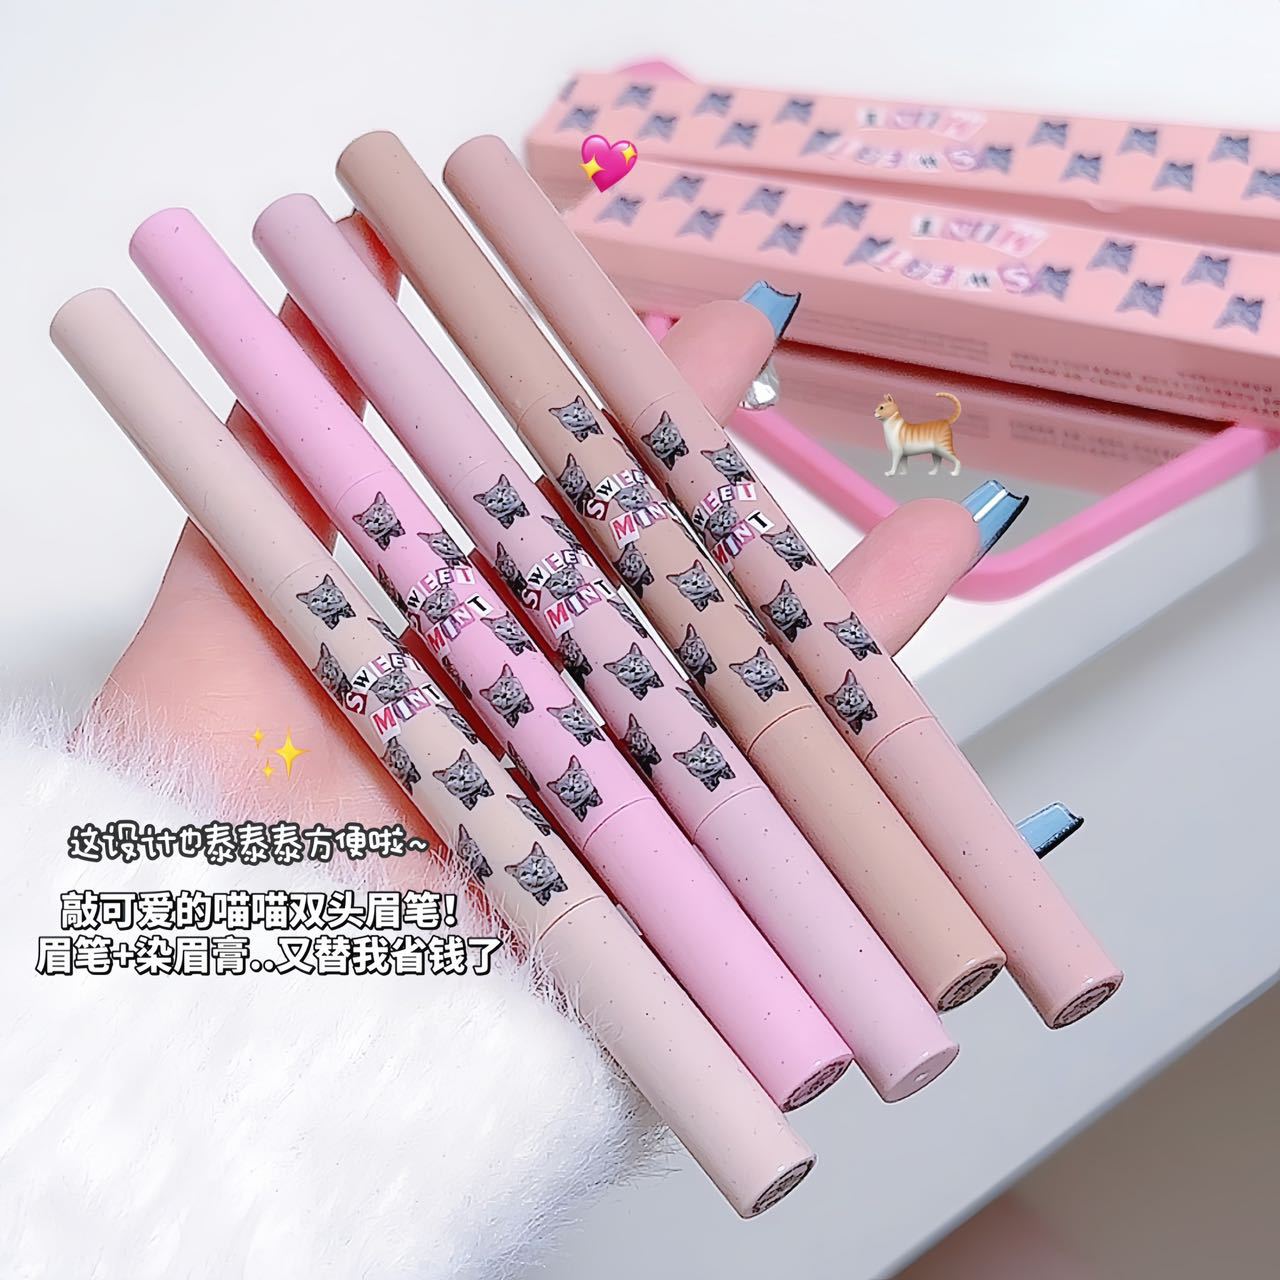 Sweetmint Double-Headed Blade Eyebrow Cream Build Natural Three-Dimensional Eyebrow Waterproof Sweat-Proof Two-in-One Eyebrow Pencil